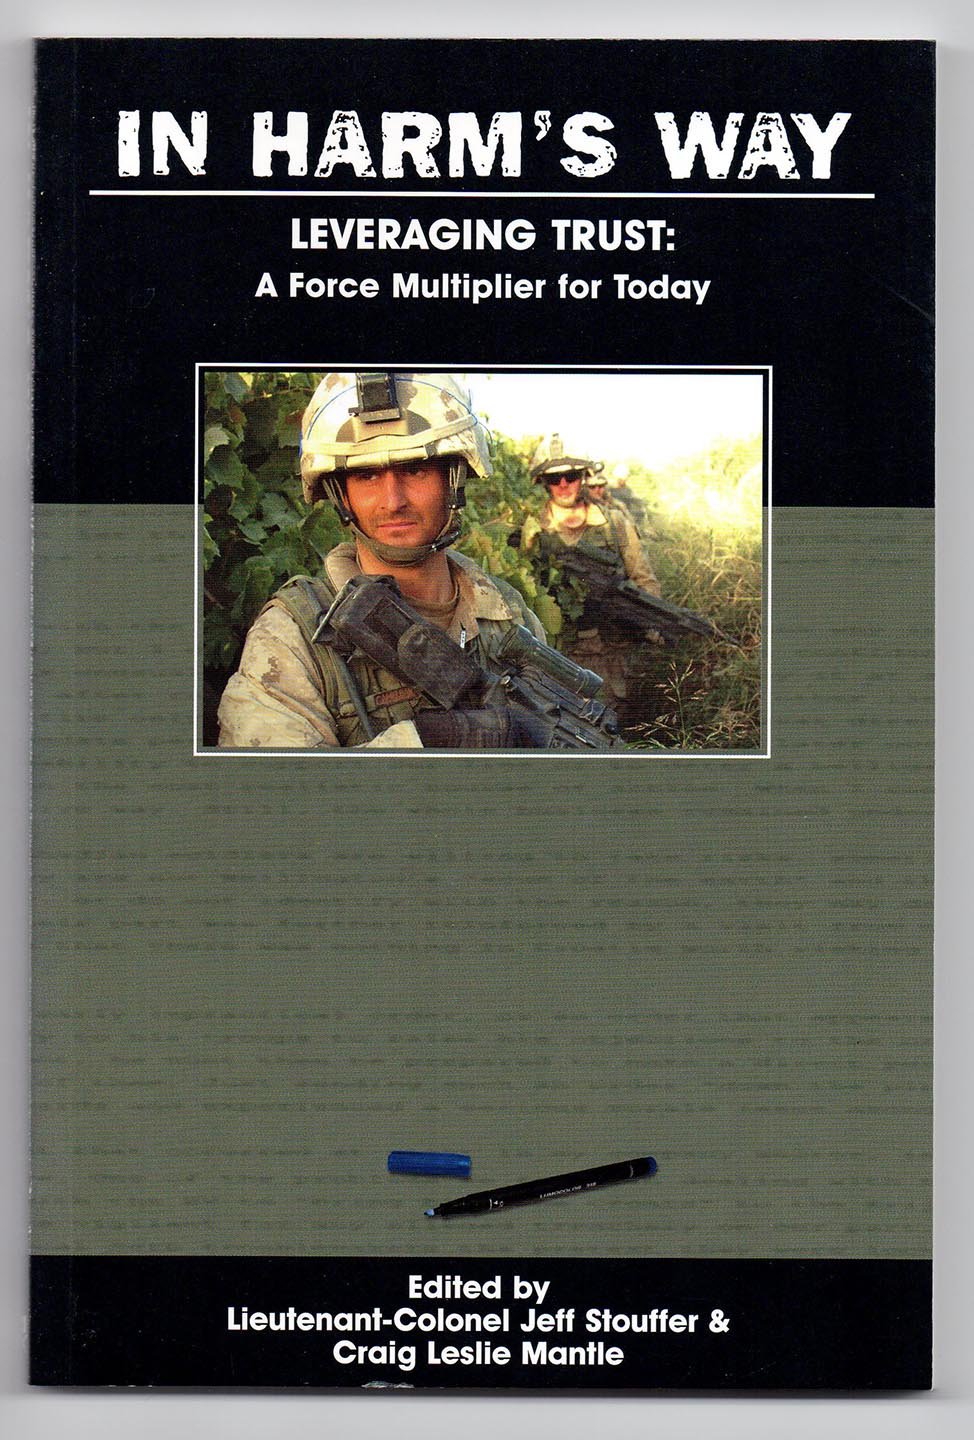 In Harm's Way. Leveraging Trust: A Force Multiplier for Today